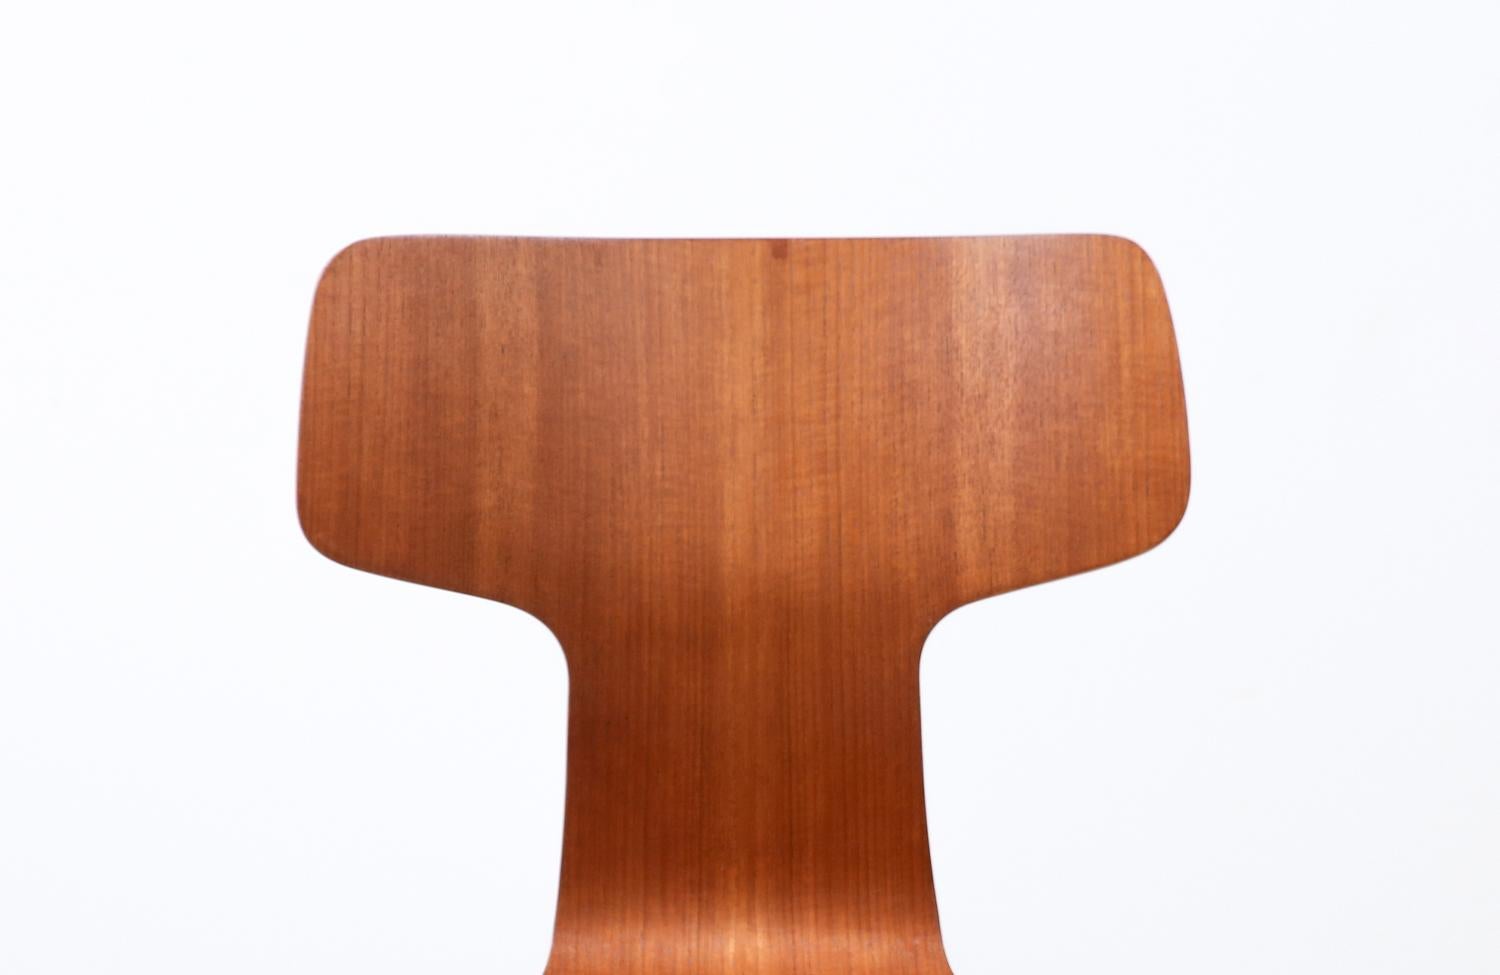 Expertly Restored - Arne Jacobsen Model-3103 Teak Chair for Fritz Hansen In Excellent Condition For Sale In Los Angeles, CA